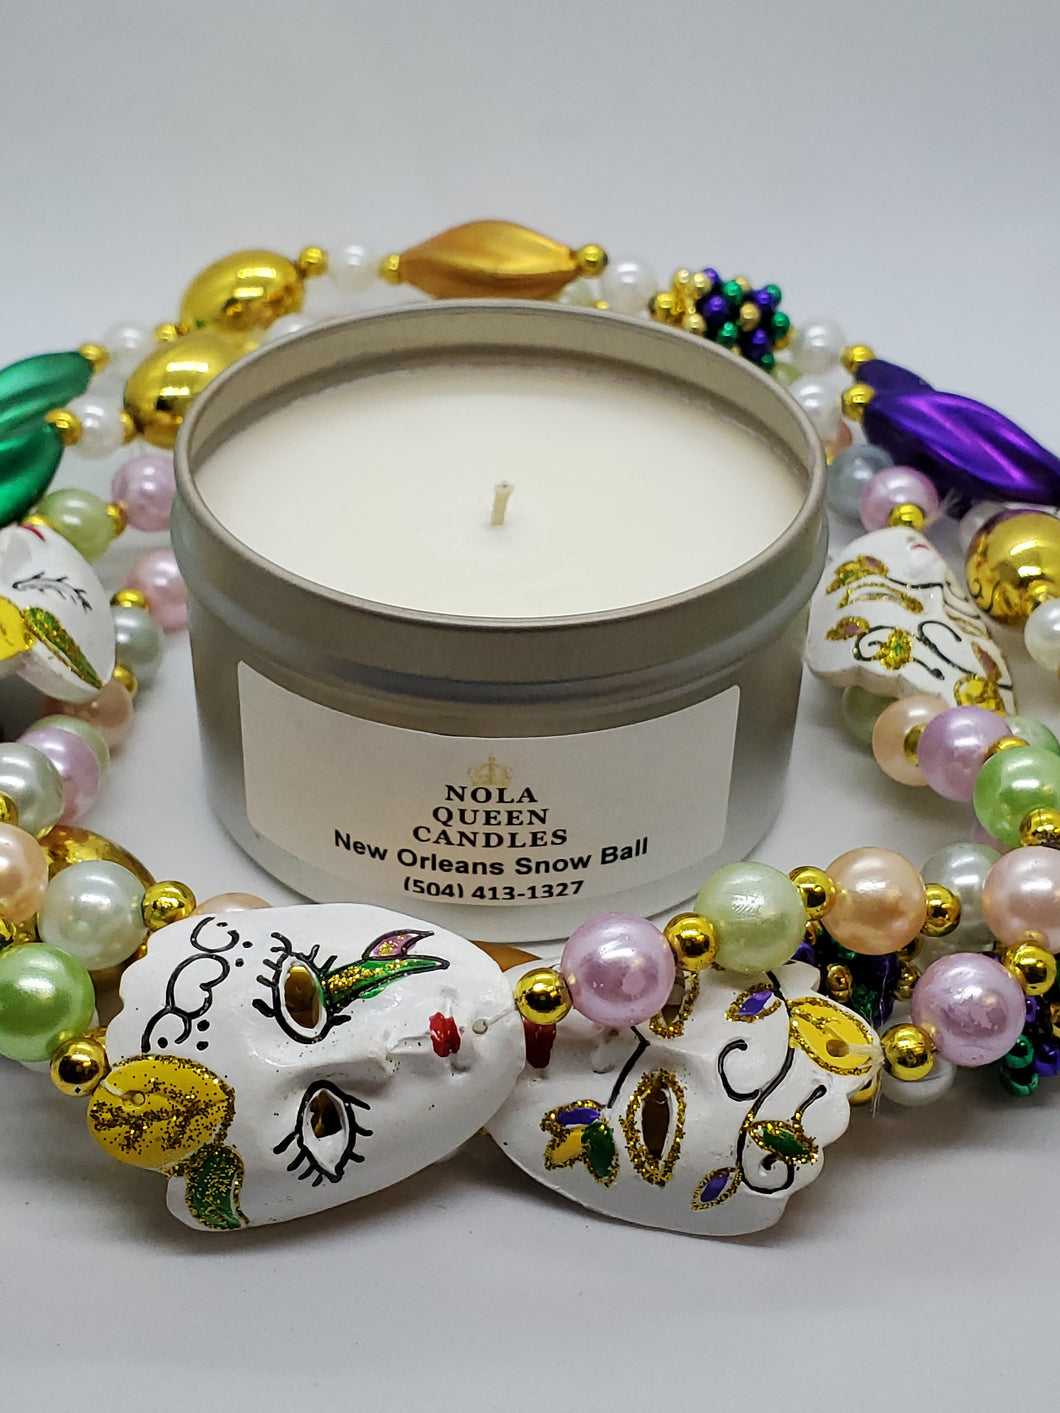 New Orleans Snow Ball Travel Candle - Nola Queen Candles